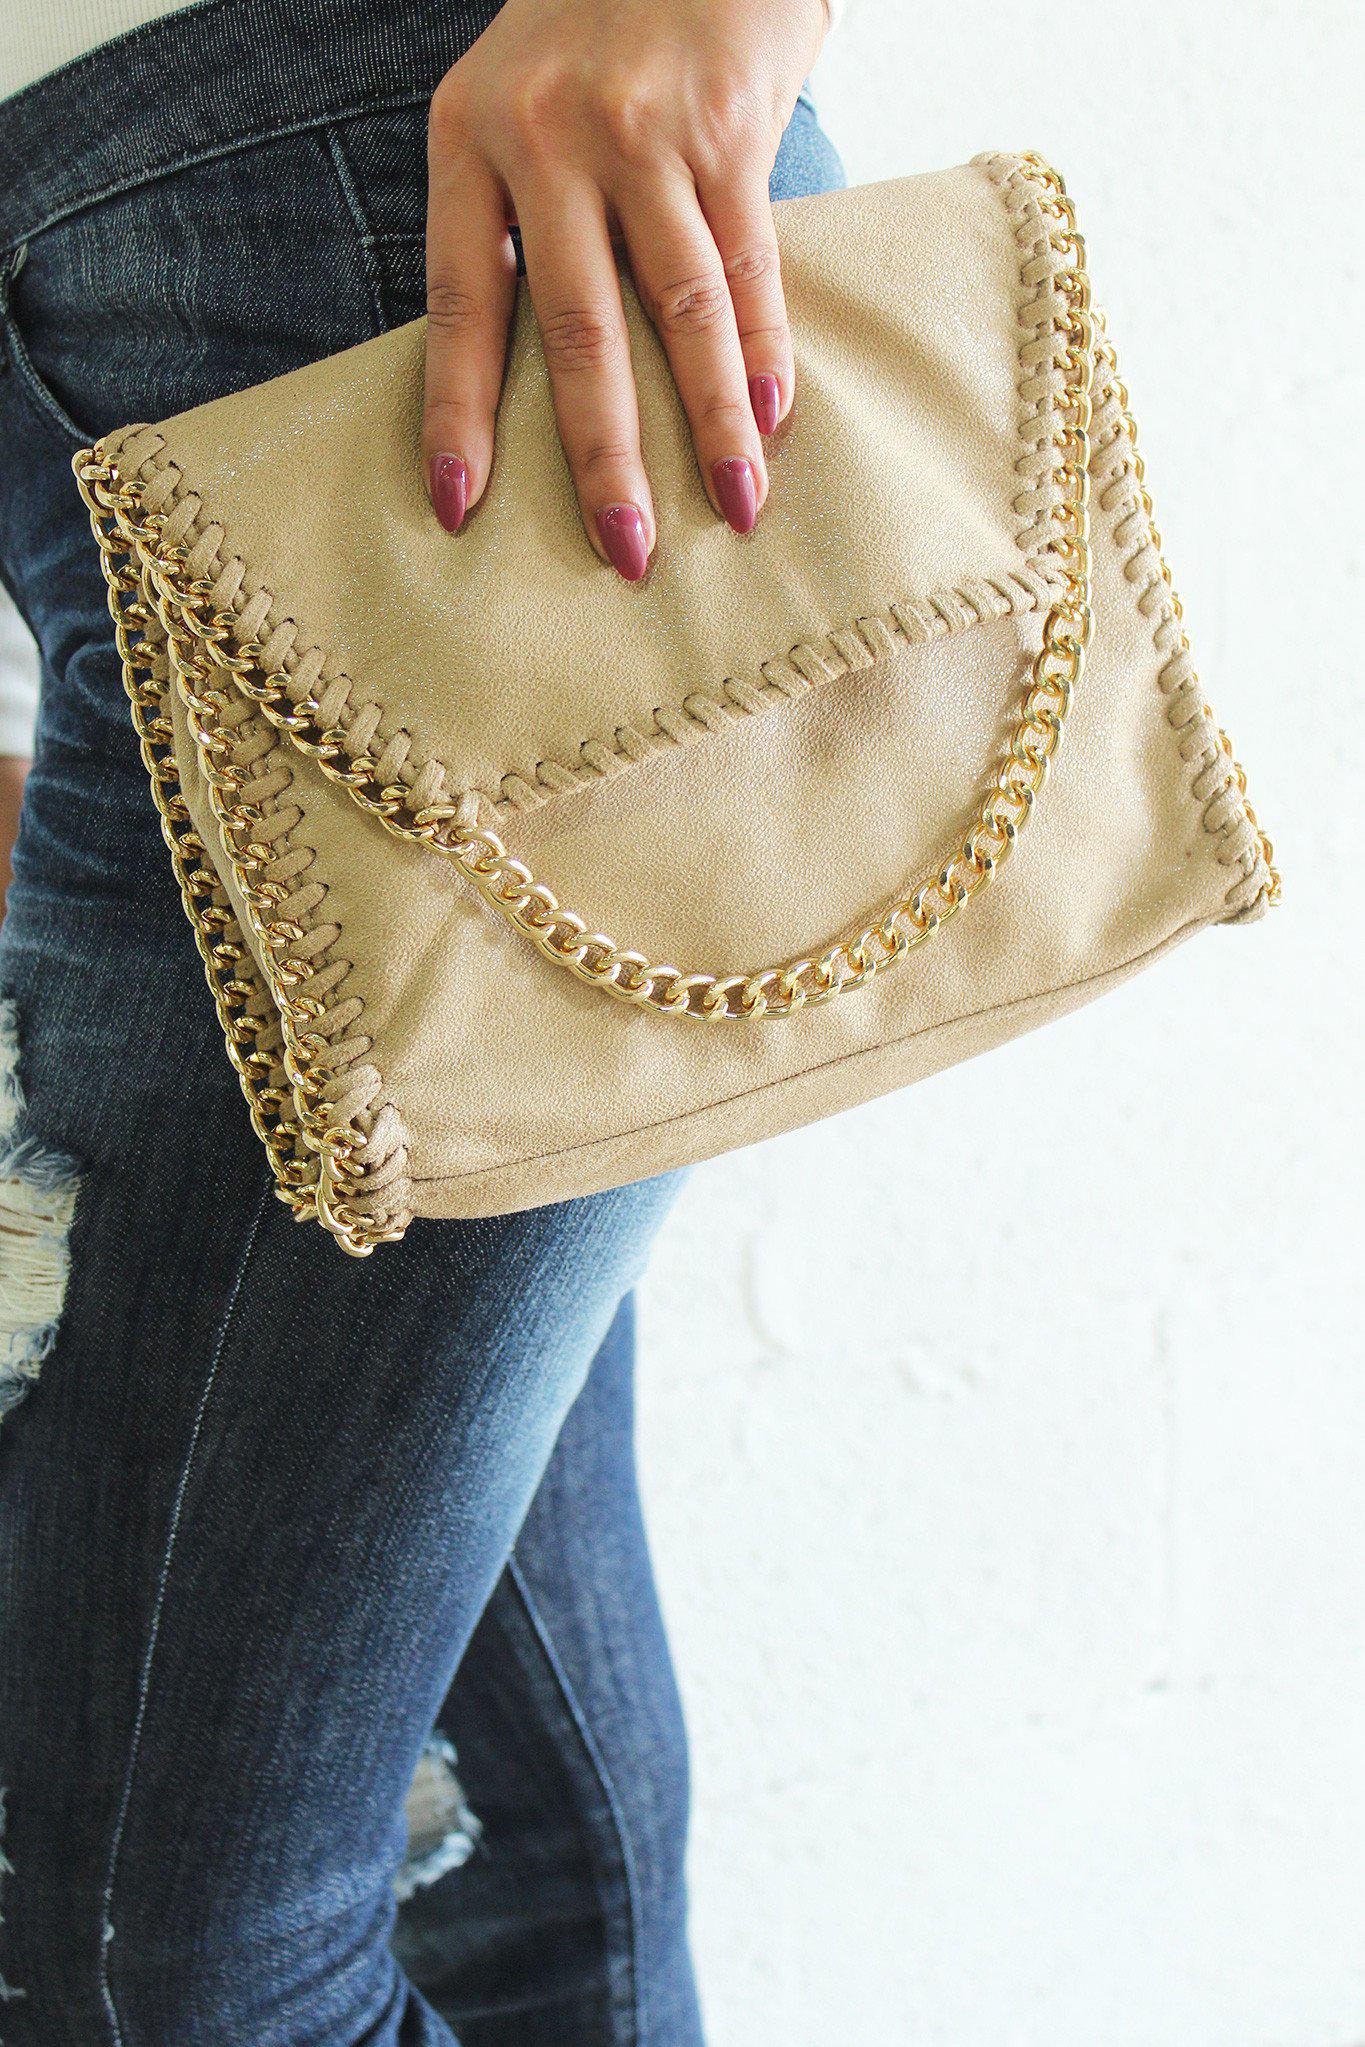 Beige Chained Clutch